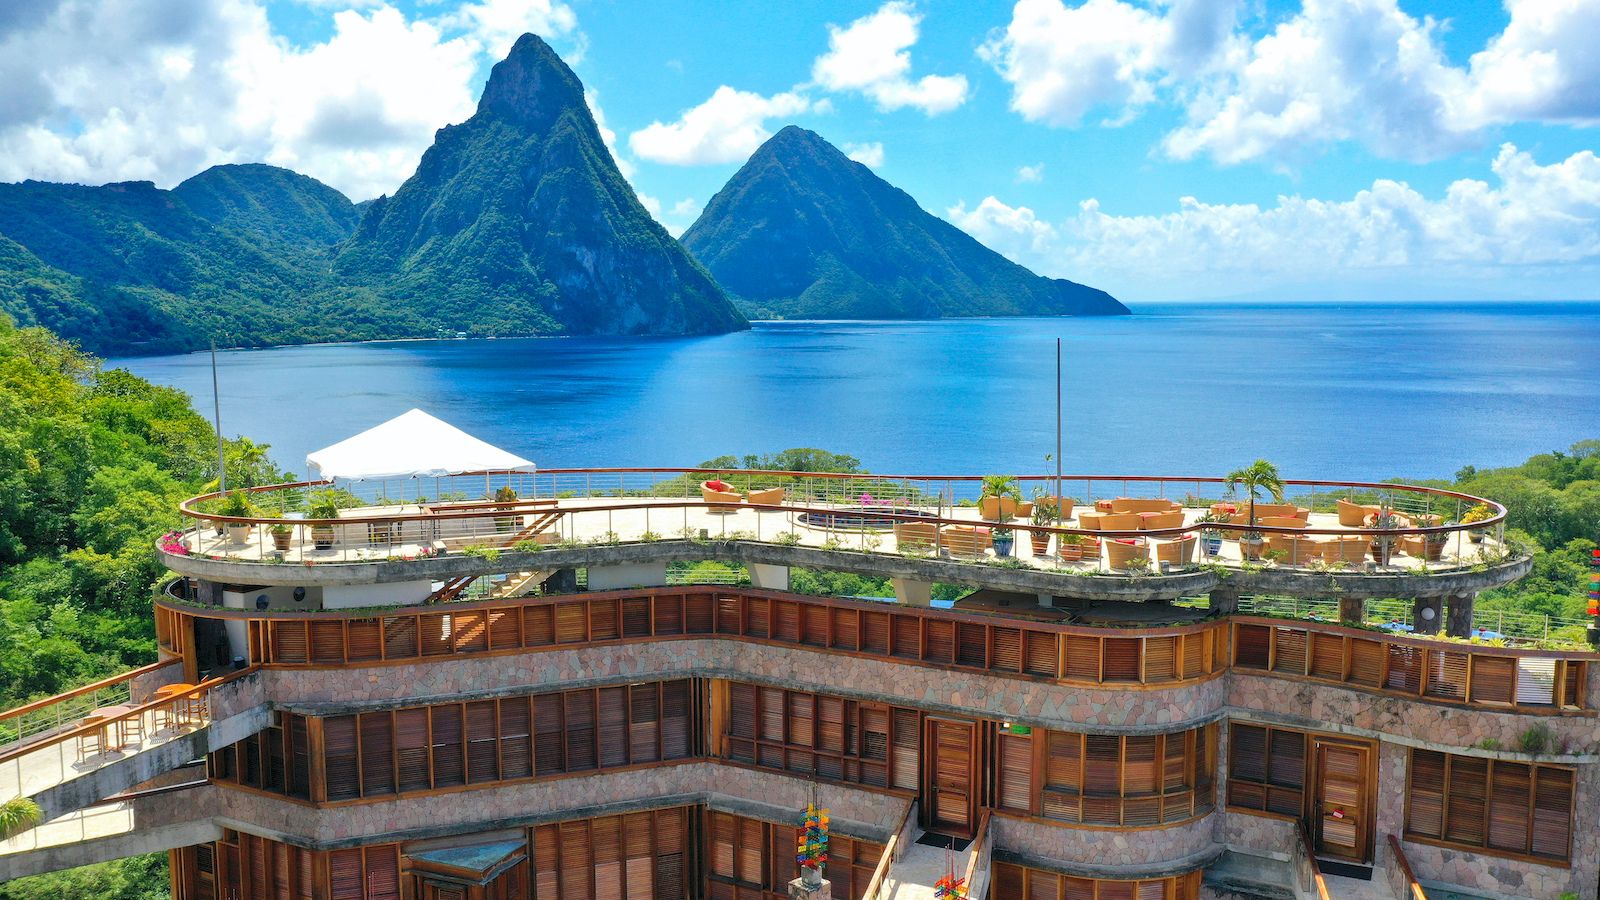 Overview of Jade Mountain